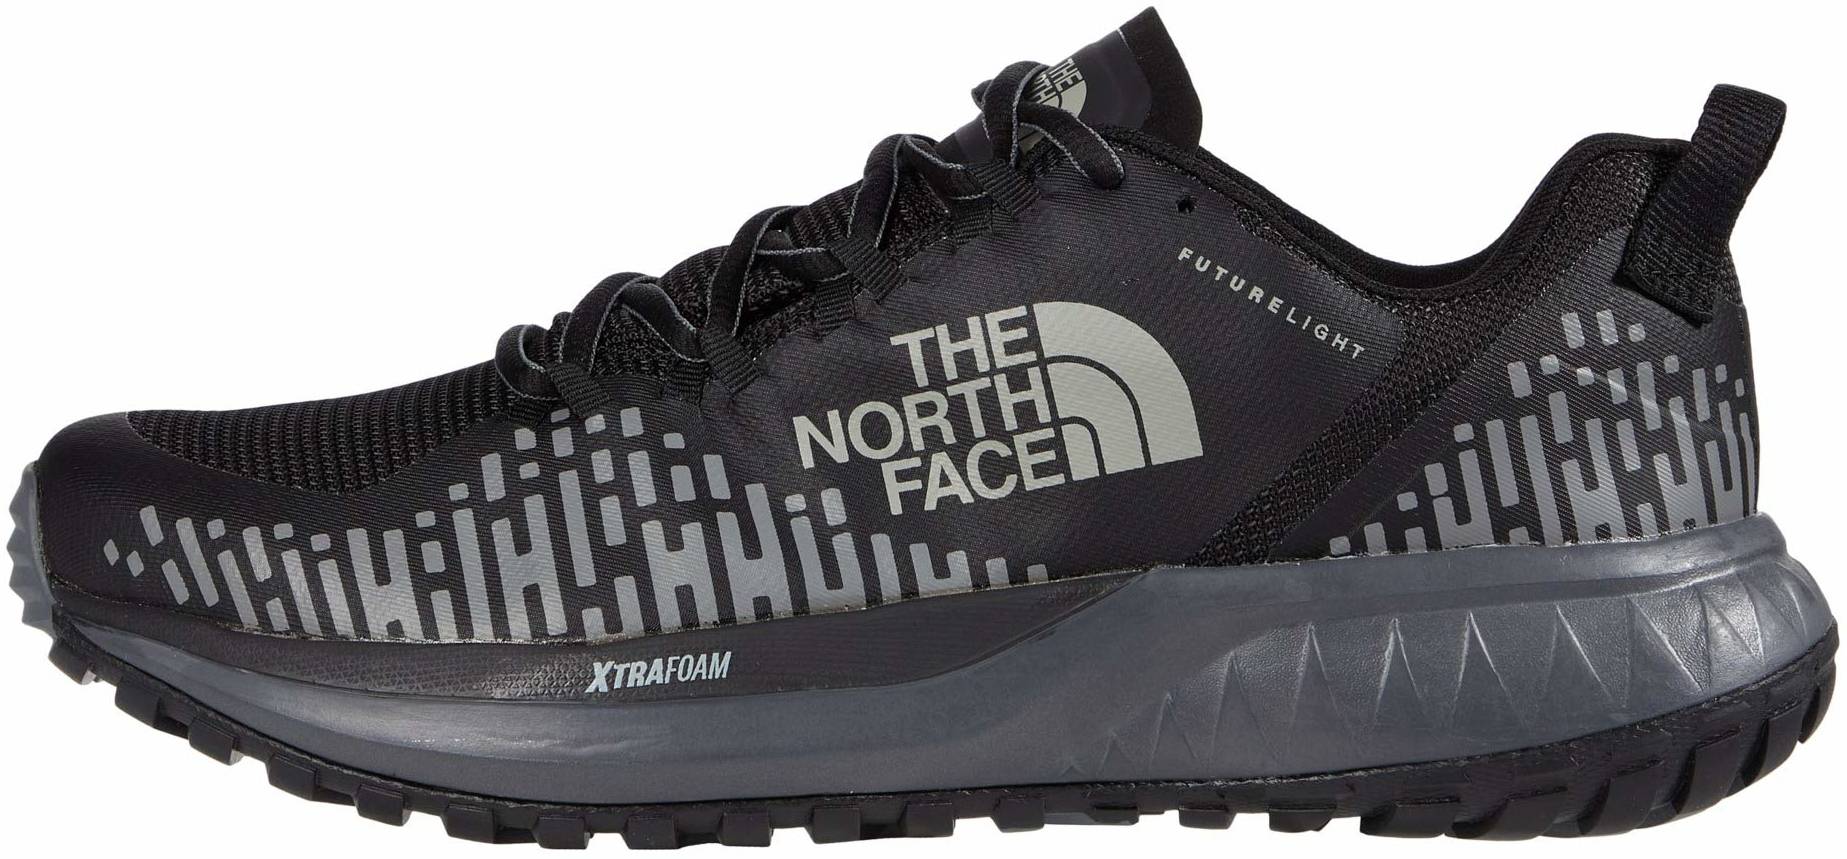 The North Face running shoes 